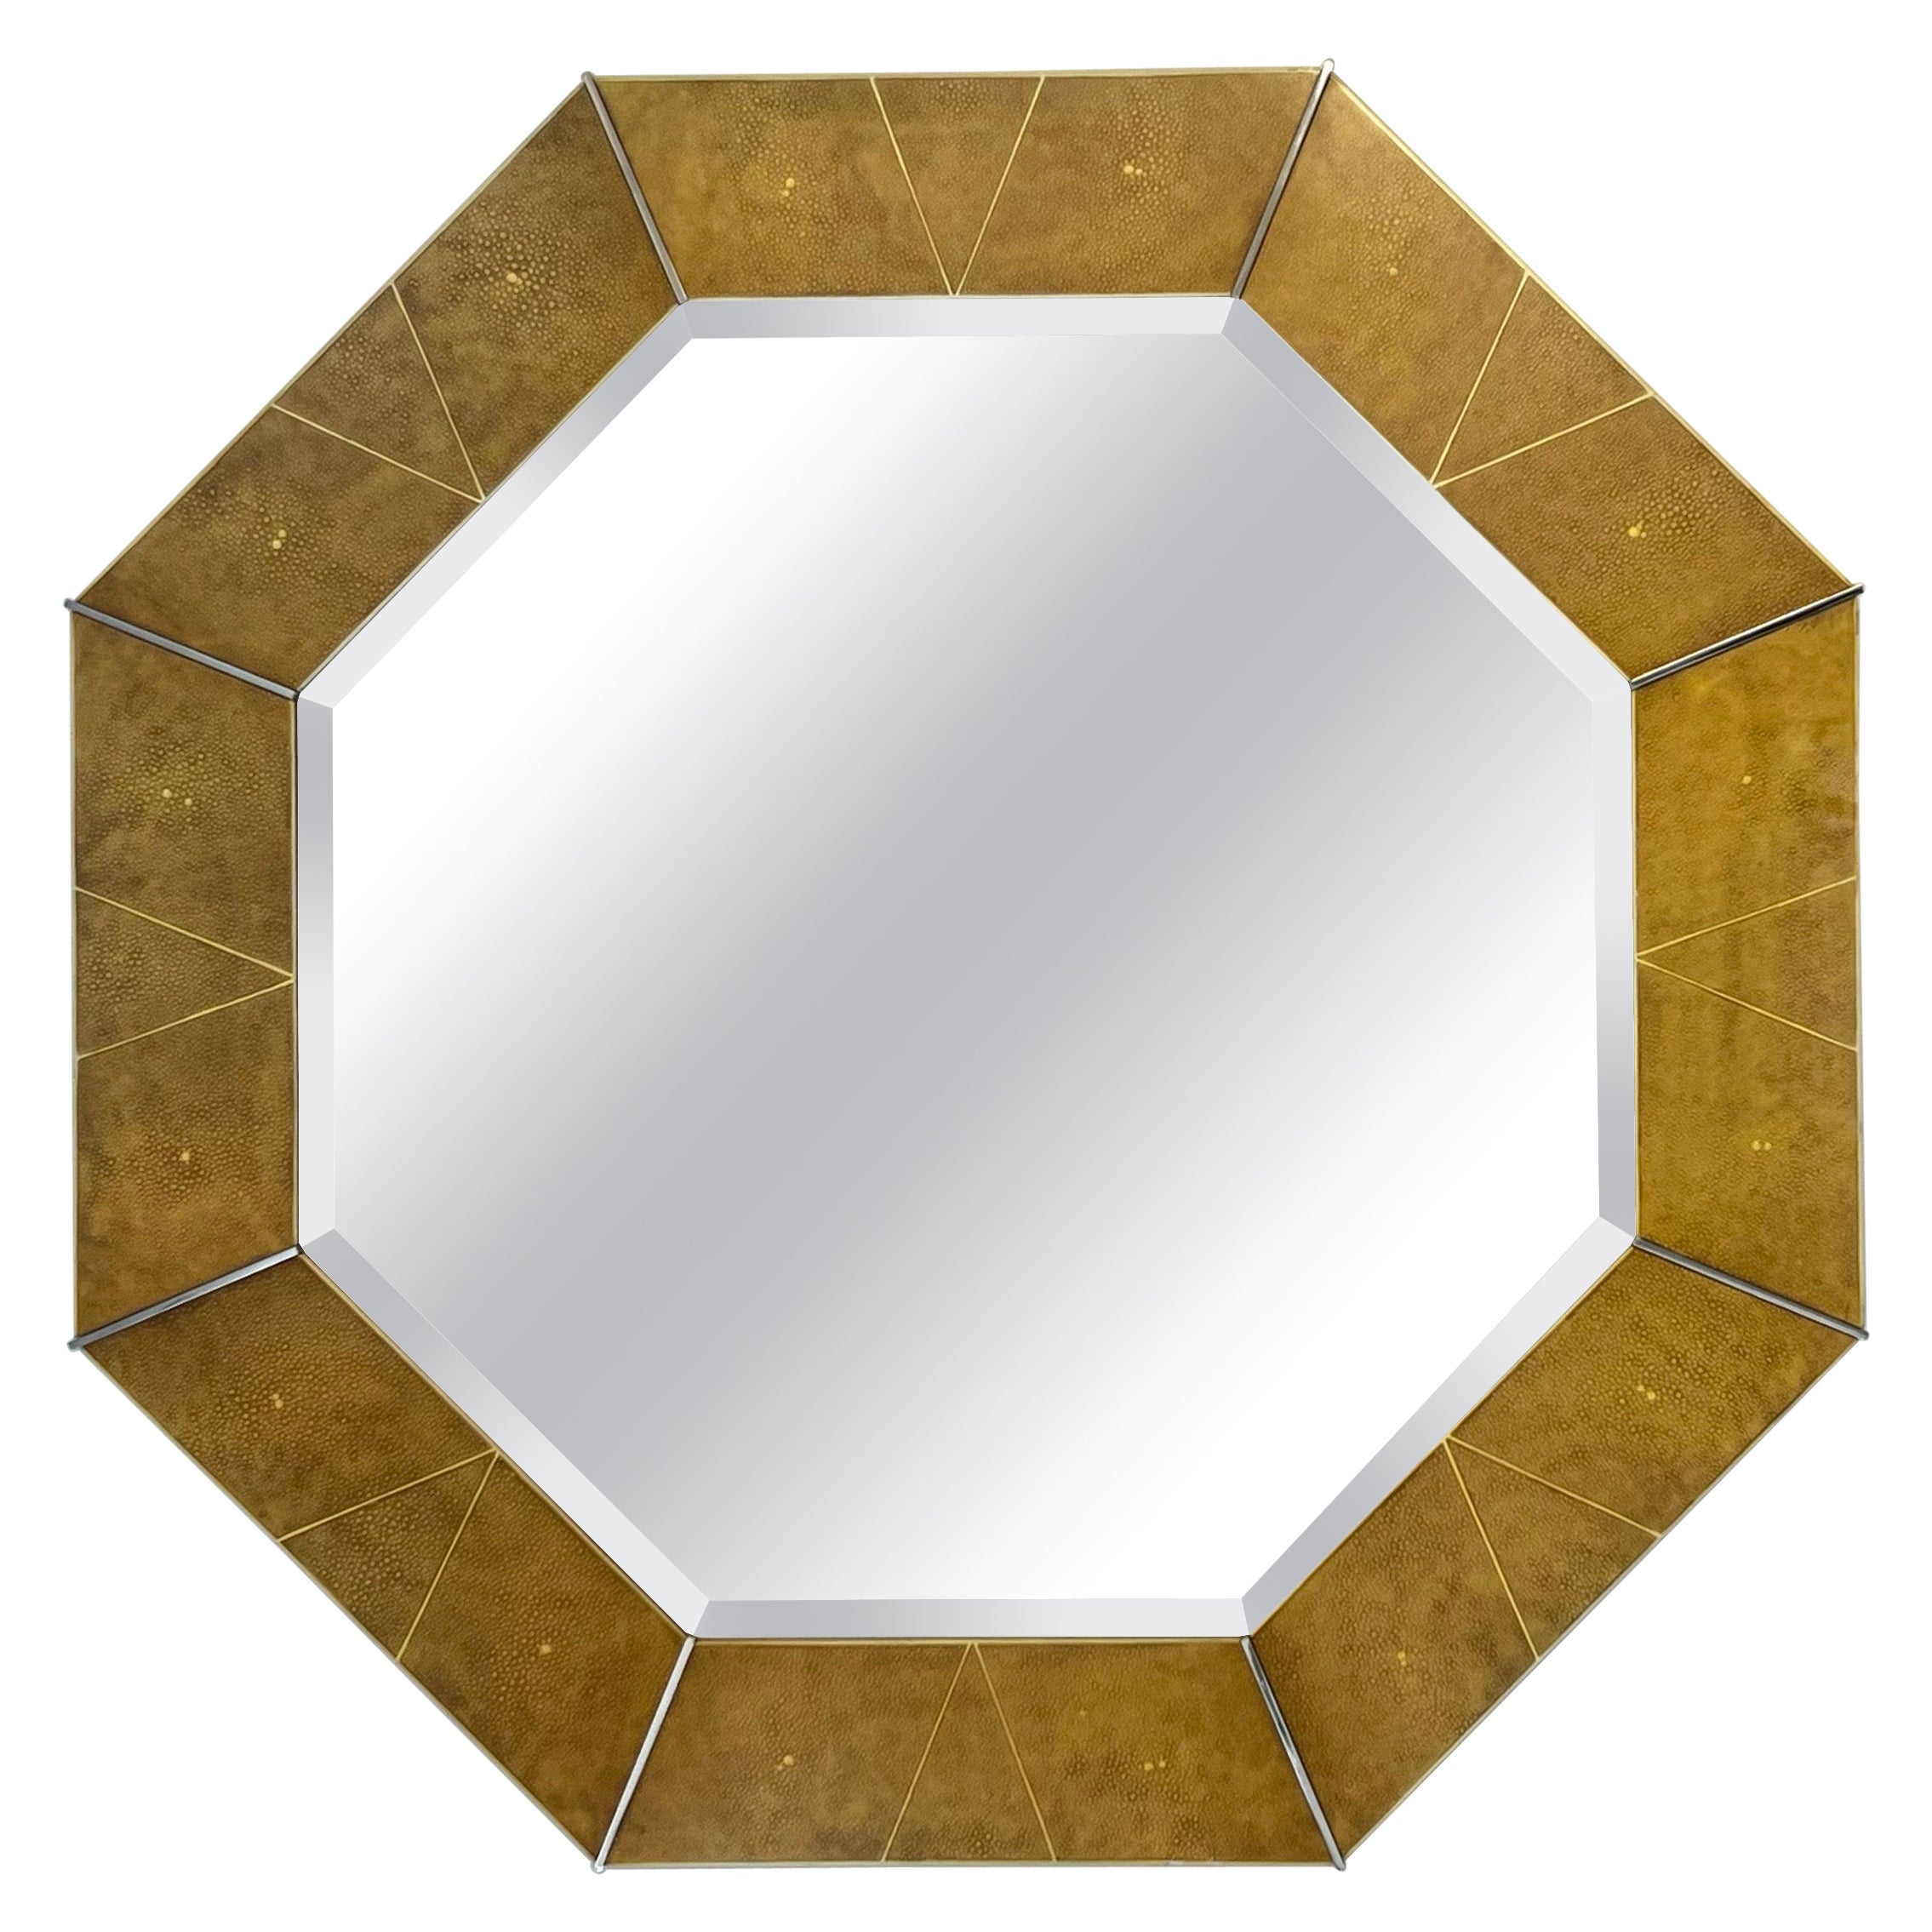 Octagonal Shagreen Lacquer and Chrome Mirror by Karl Springer for Suzanne Sumers For Sale